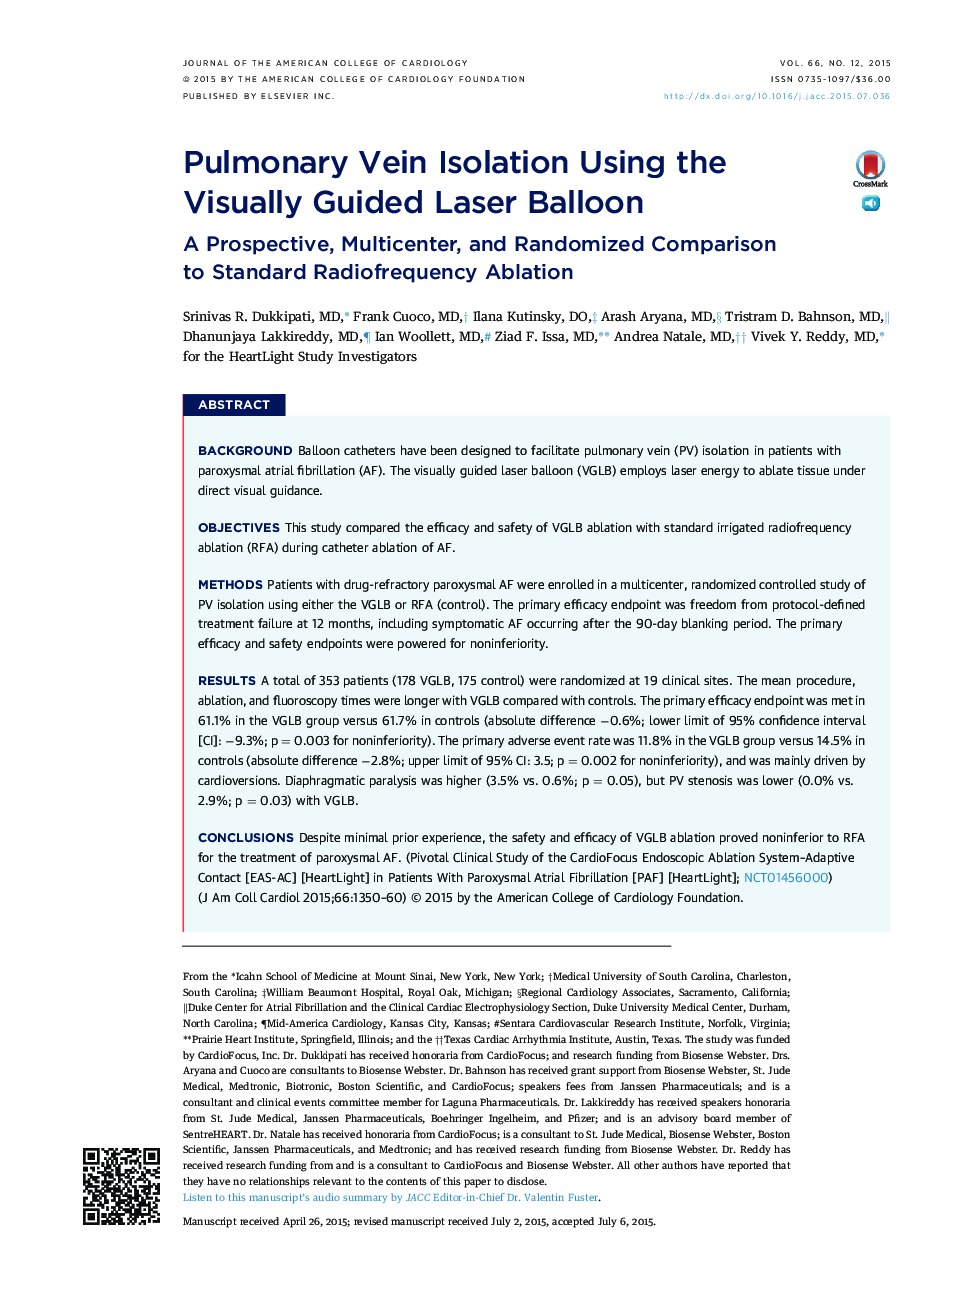 Pulmonary Vein Isolation Using the Visually Guided Laser Balloon : A Prospective, Multicenter, and Randomized Comparison to Standard Radiofrequency Ablation